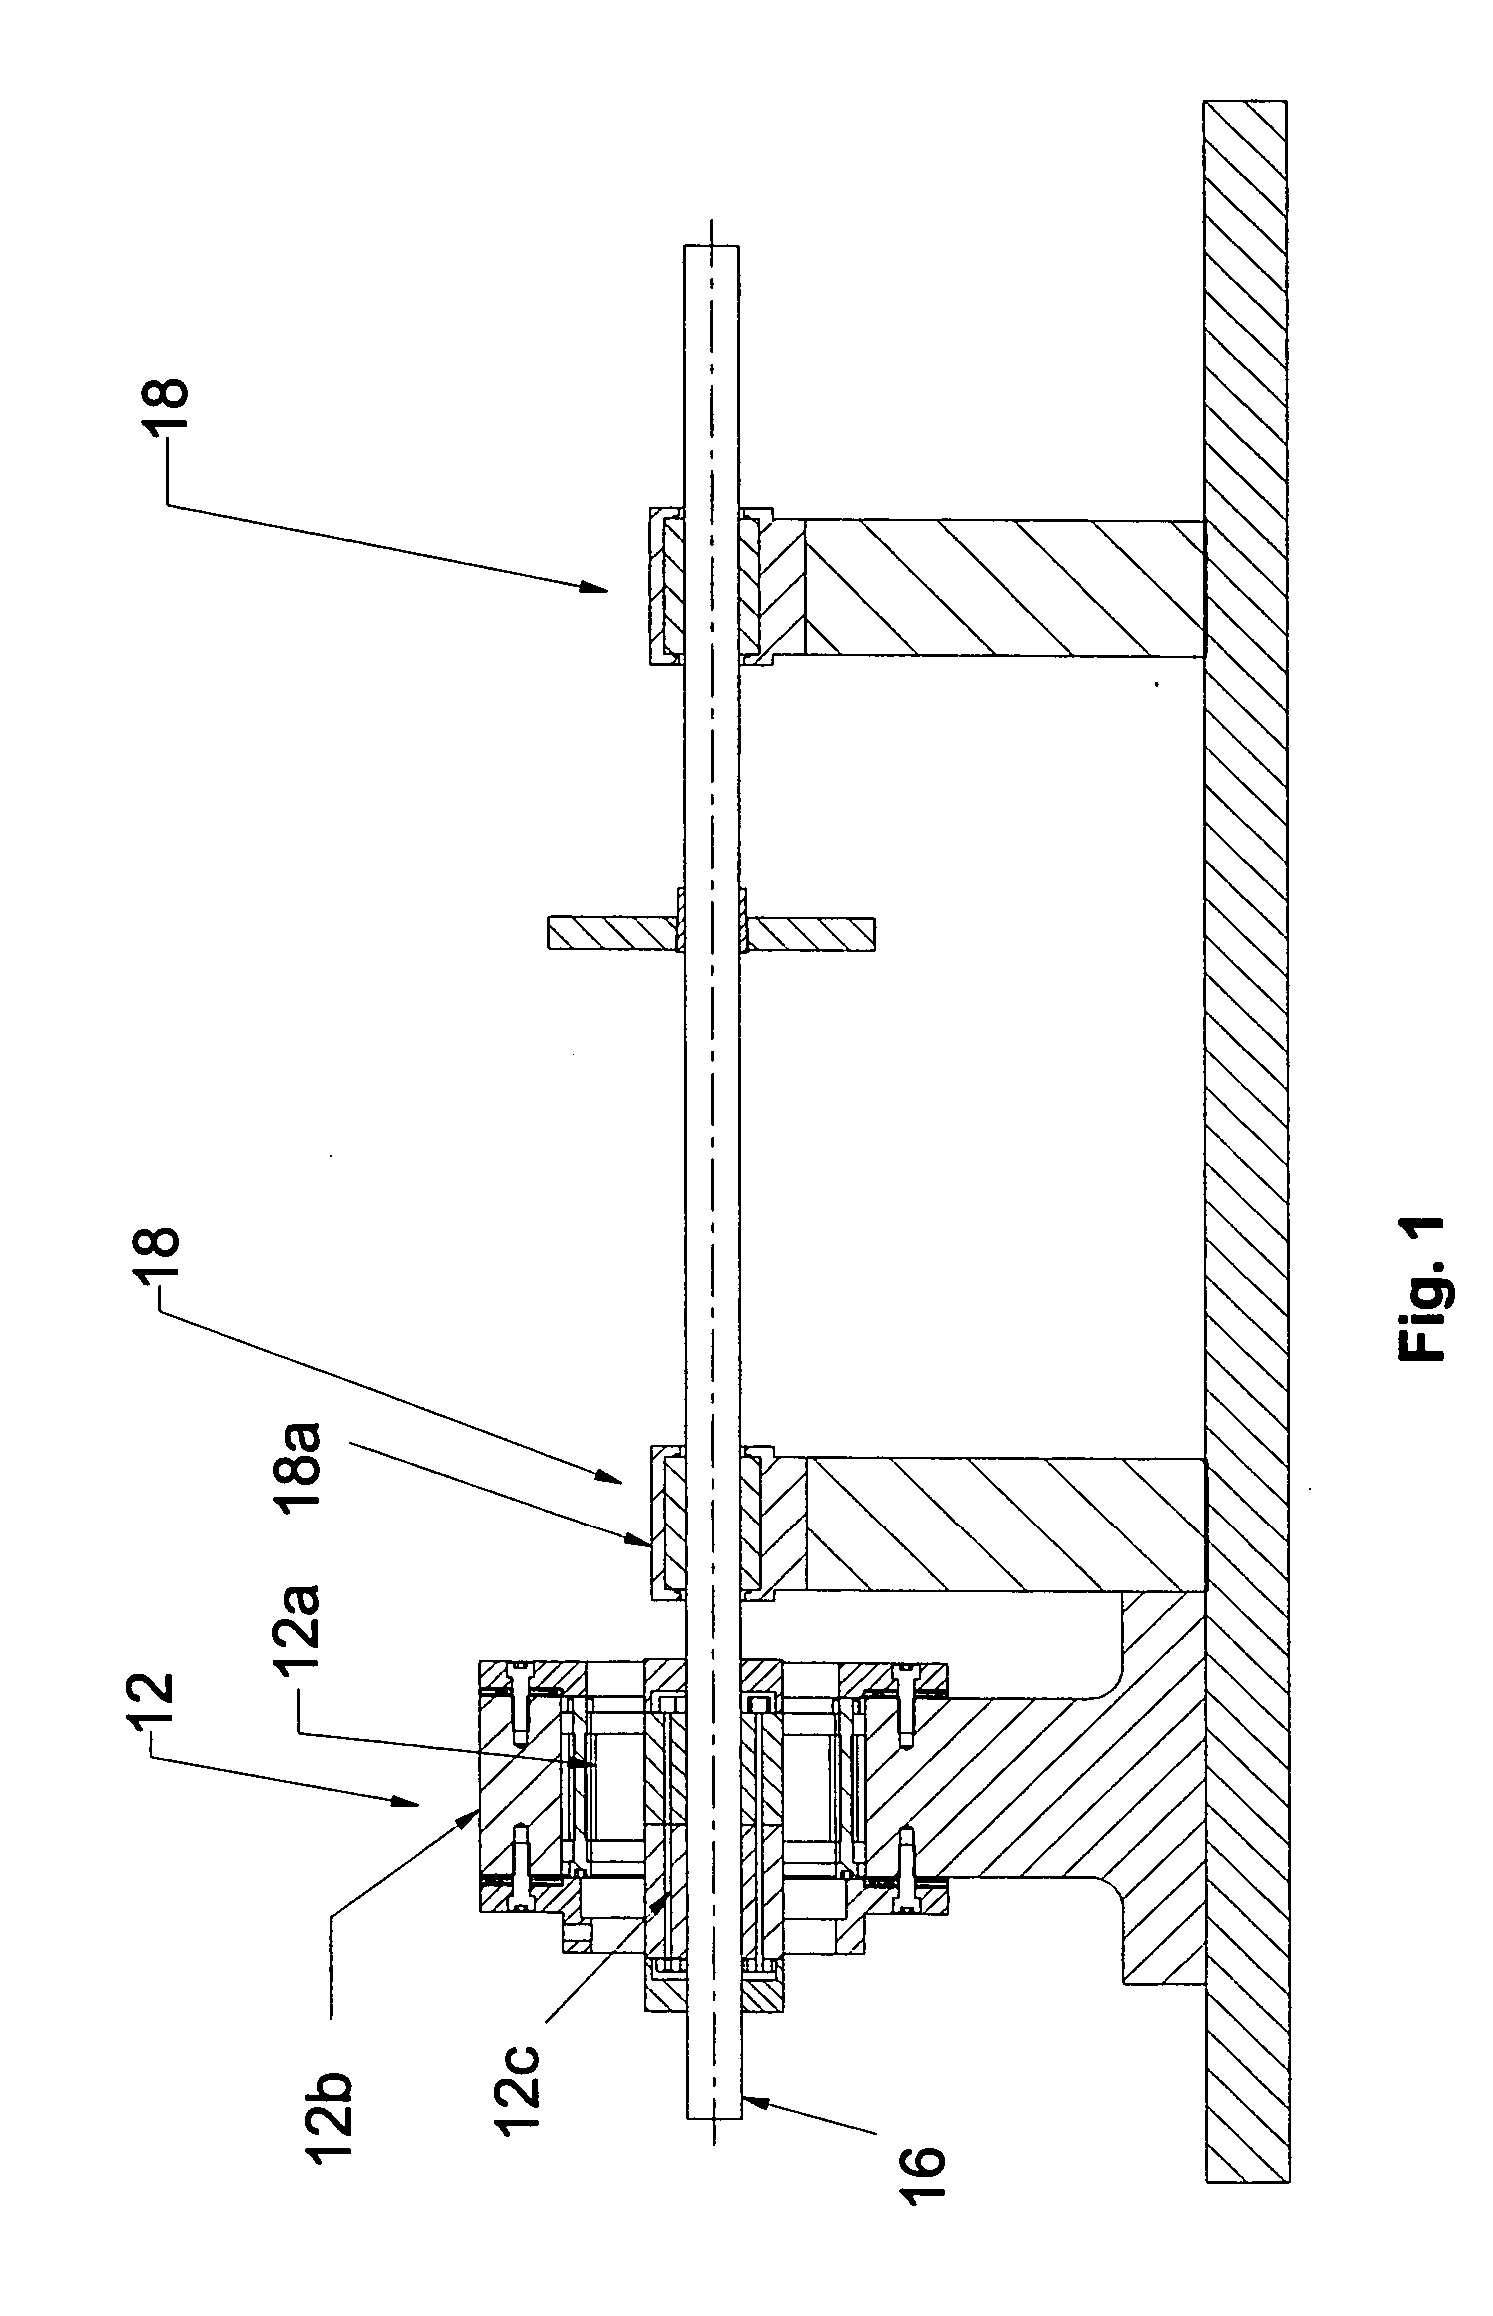 Methods of controlling the instability in fluid film bearings